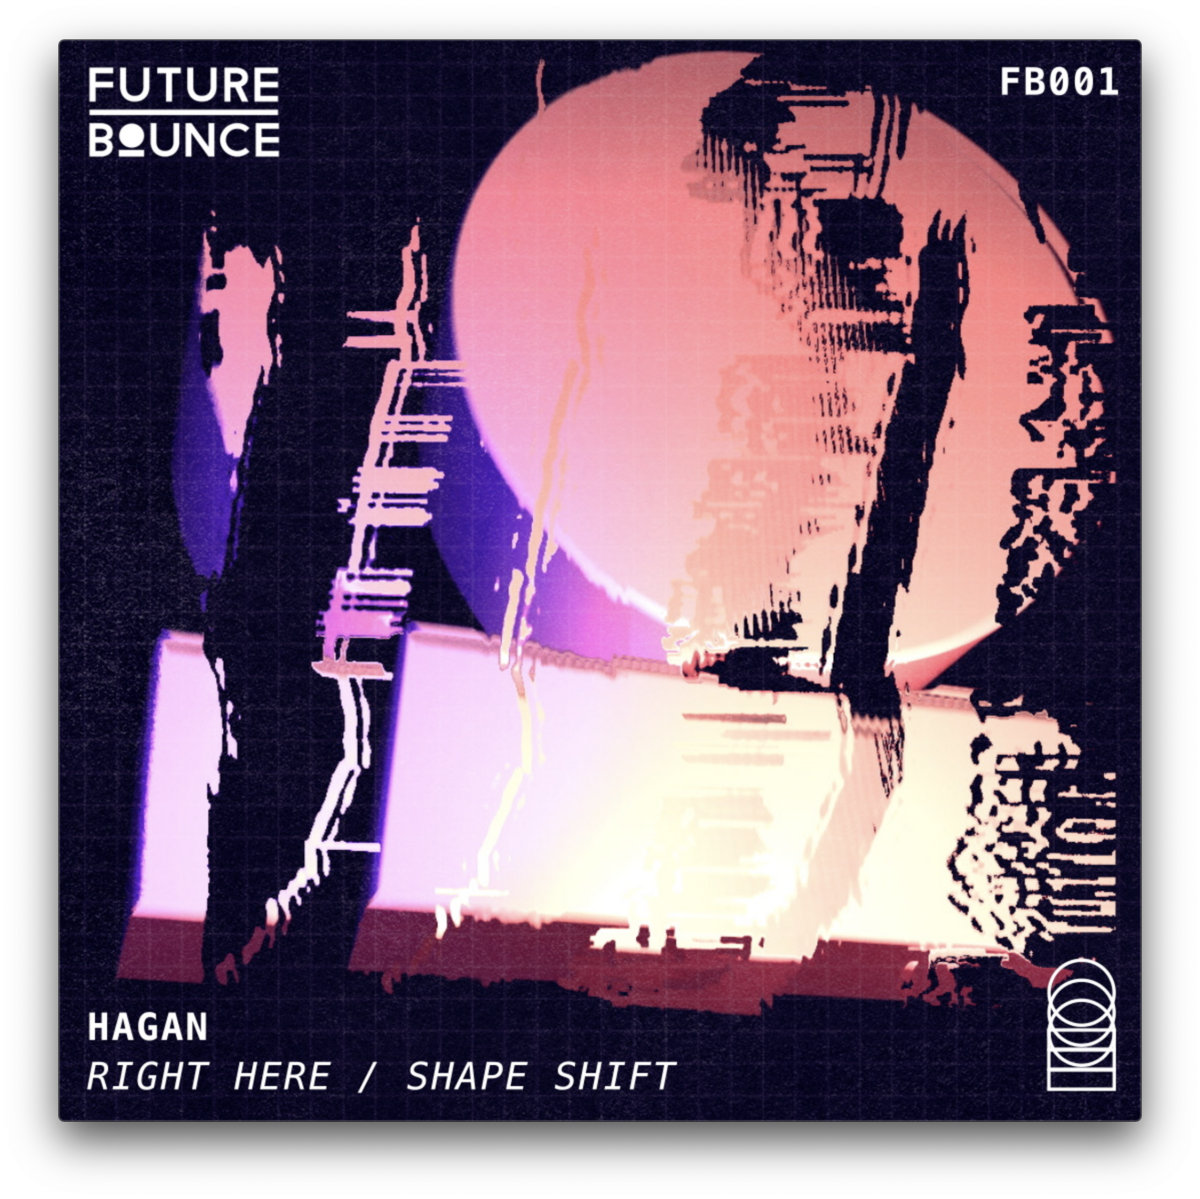 Hagan drops two new club tracks "Right Here" and "Shape Shift"